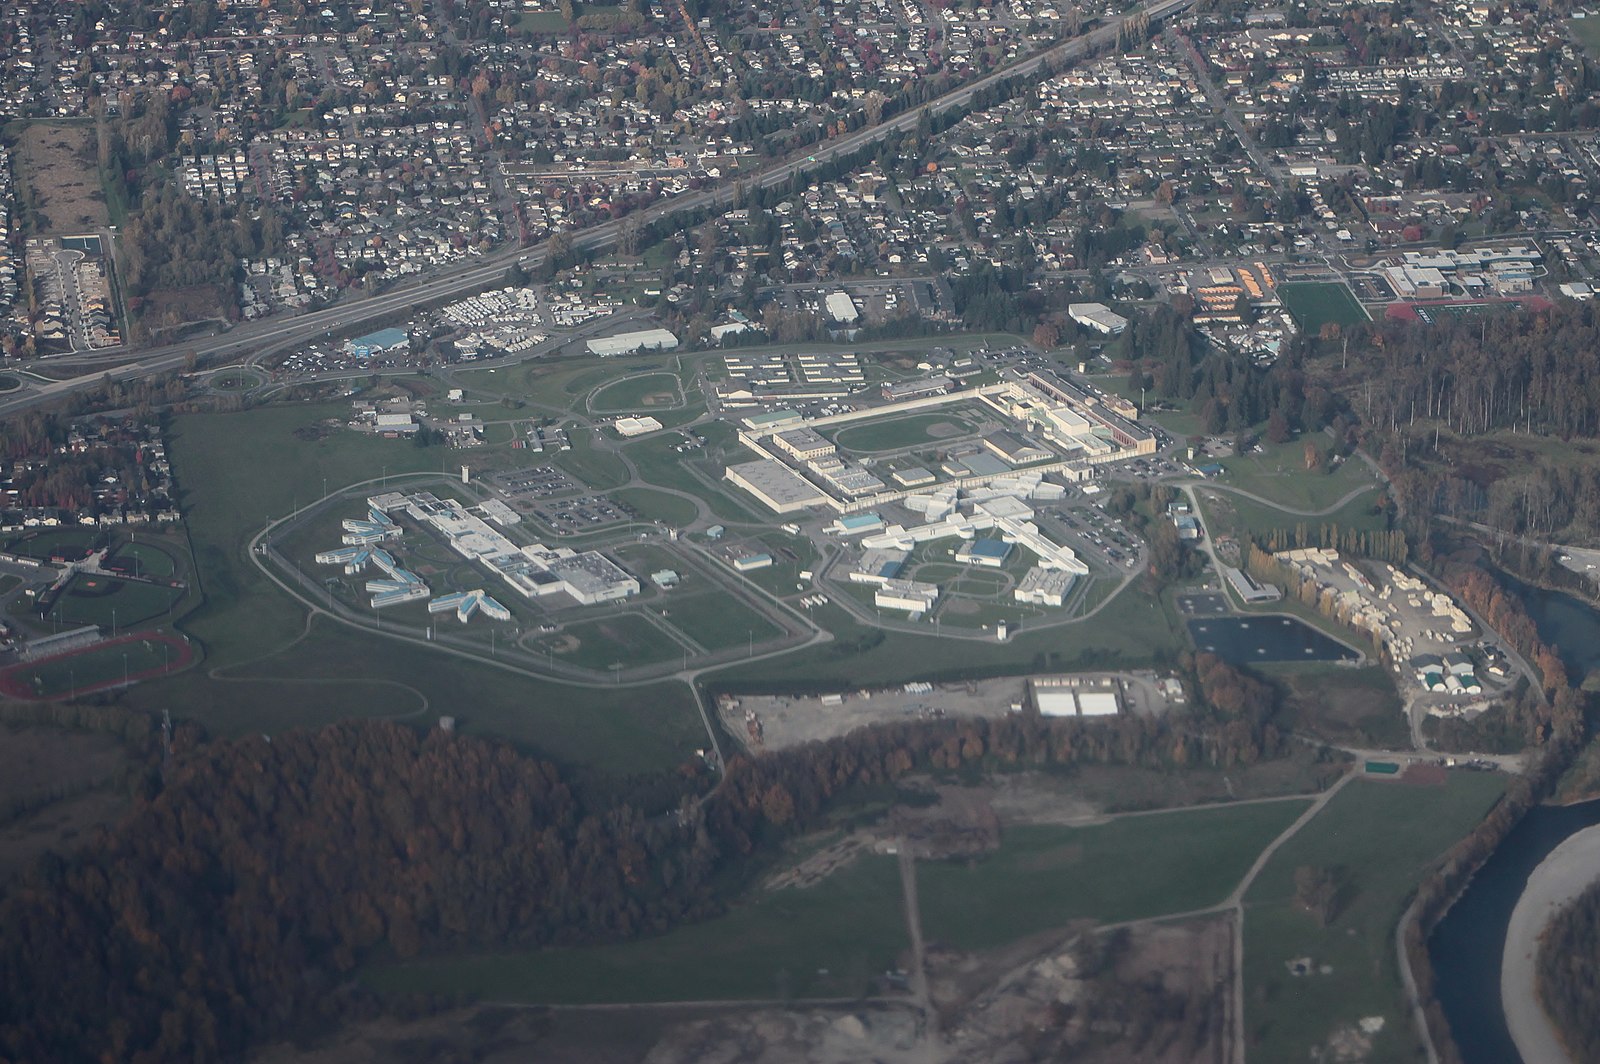 An aerial view of the Monroe Correctional Complex, a state prison in Monroe, Washington.